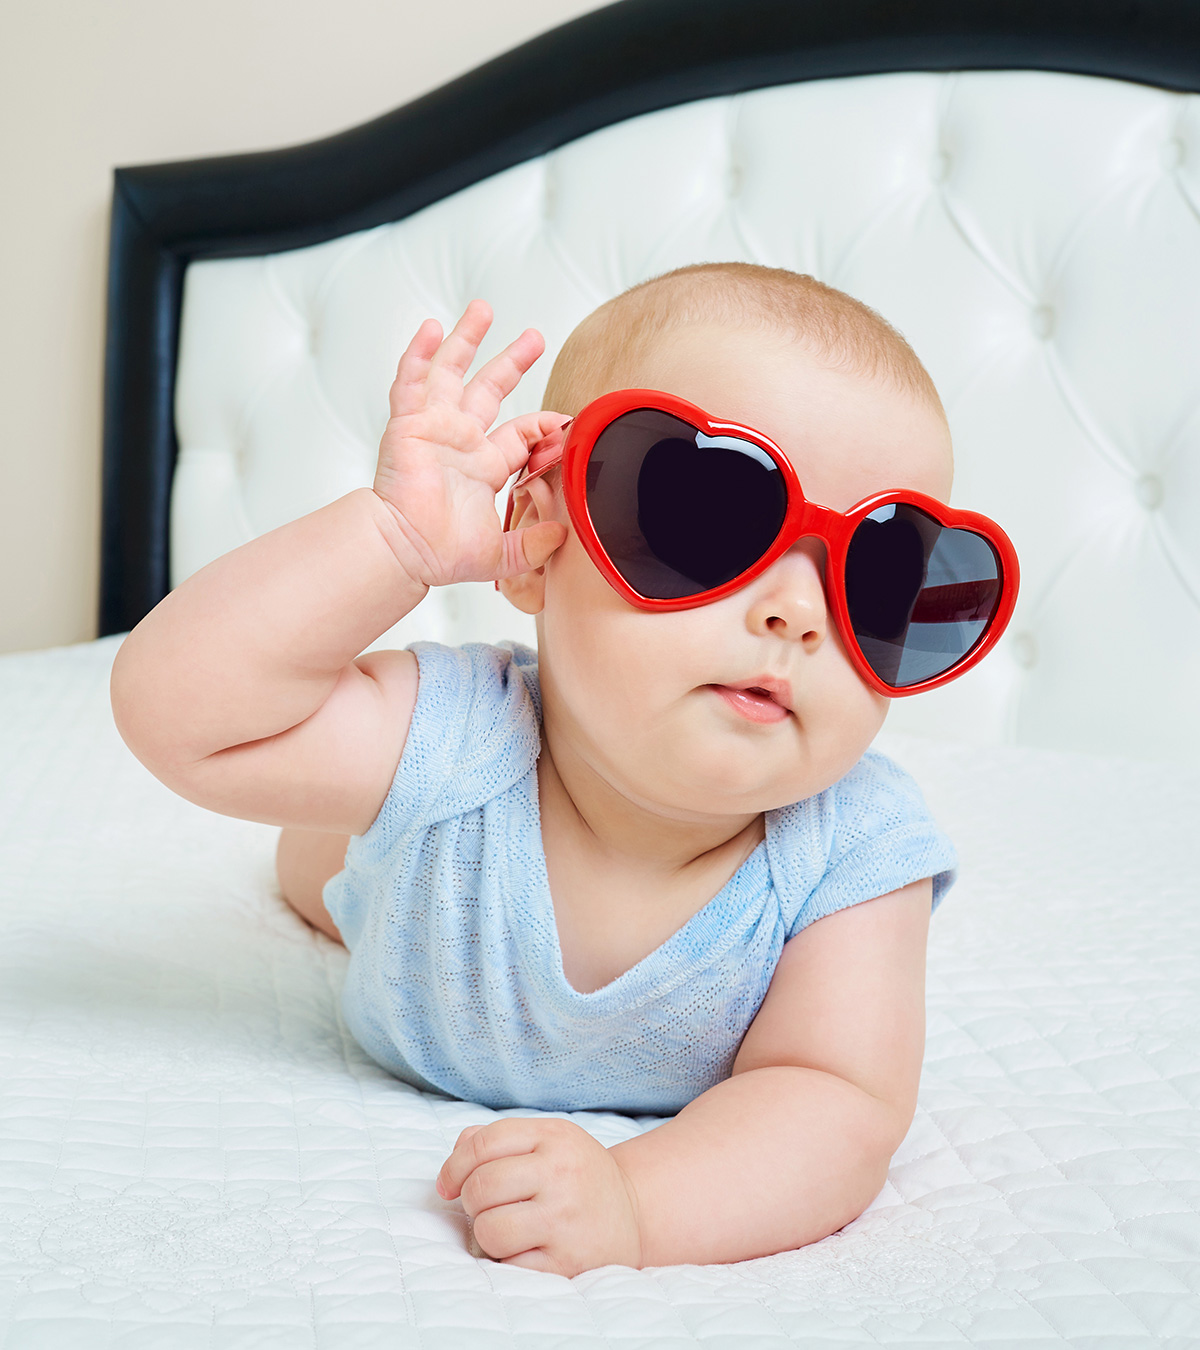 150 Sweet Baby Names That Mean Love, For Girls And Boys